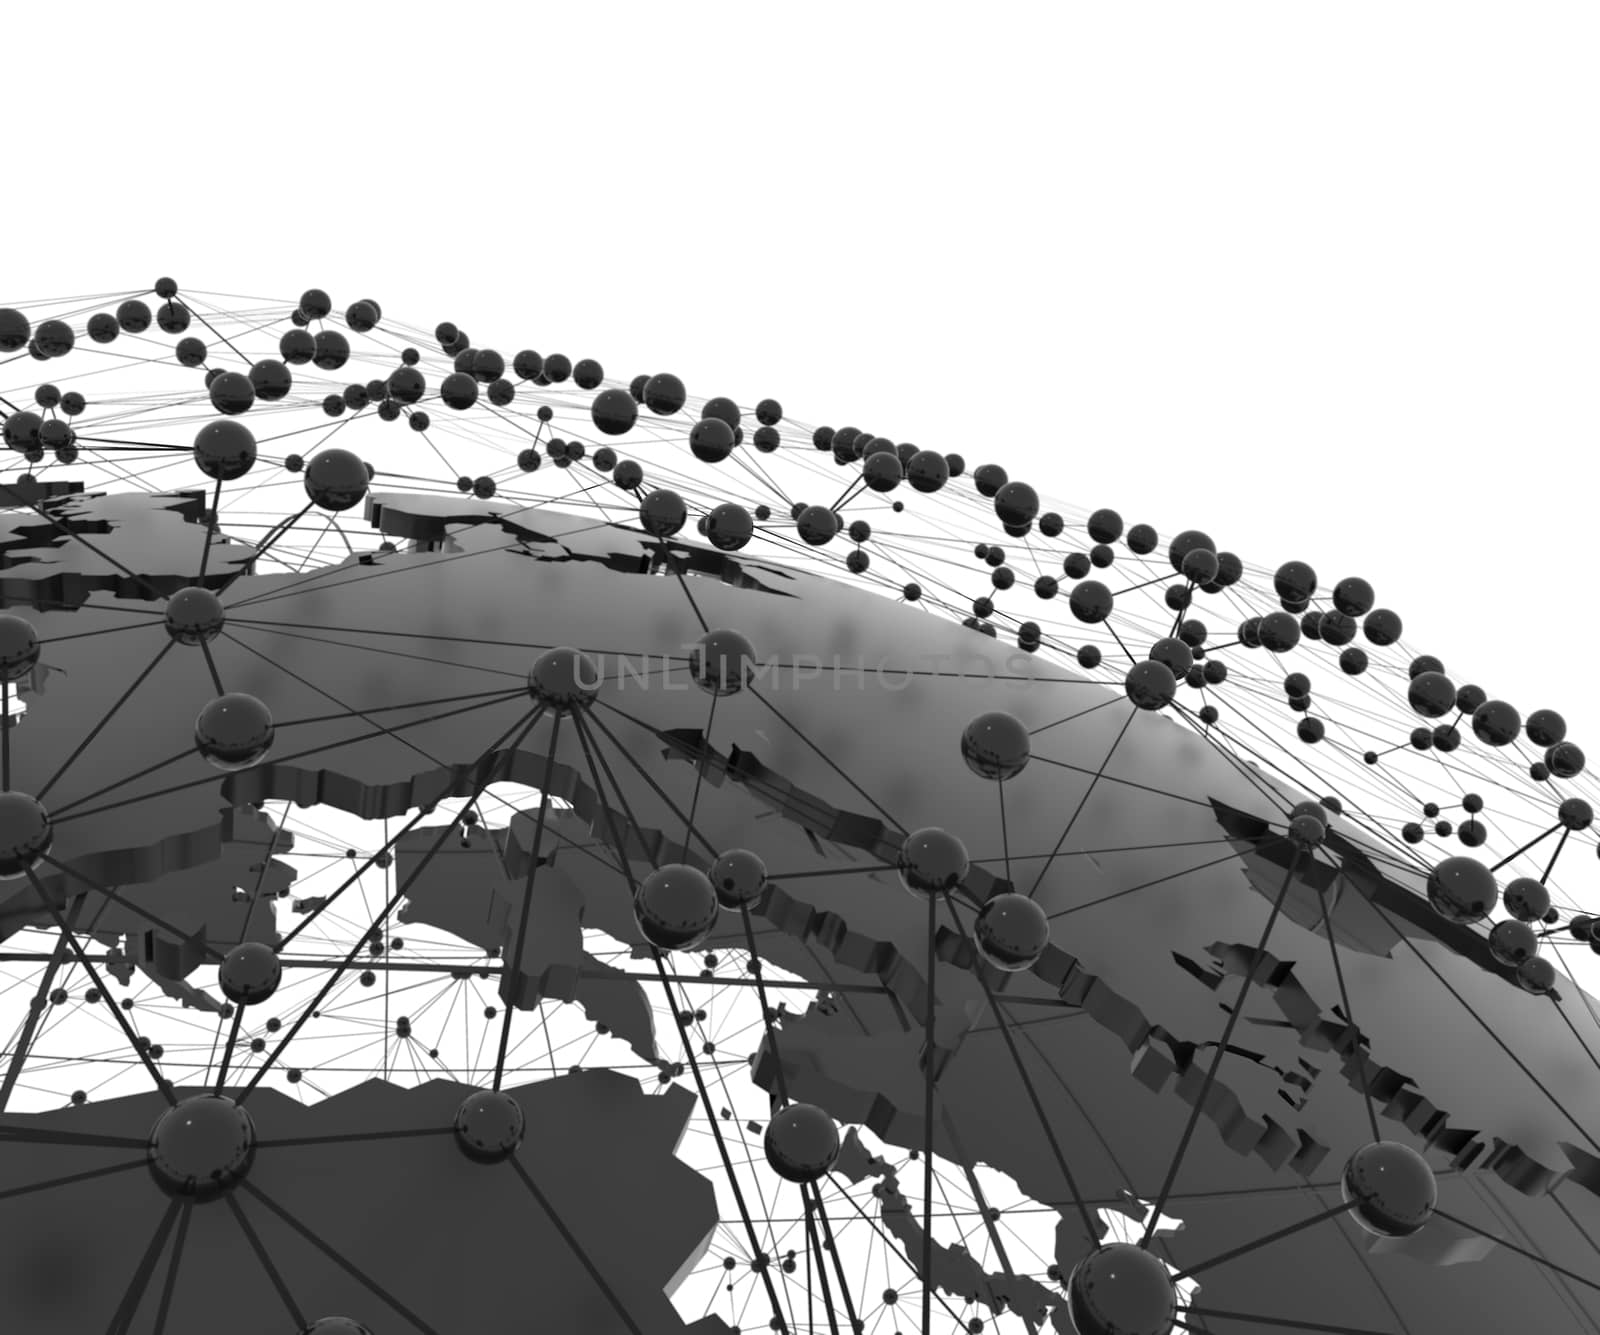 Globe internet connecting. Black Earth with dots and lines on white background. 3d illustration